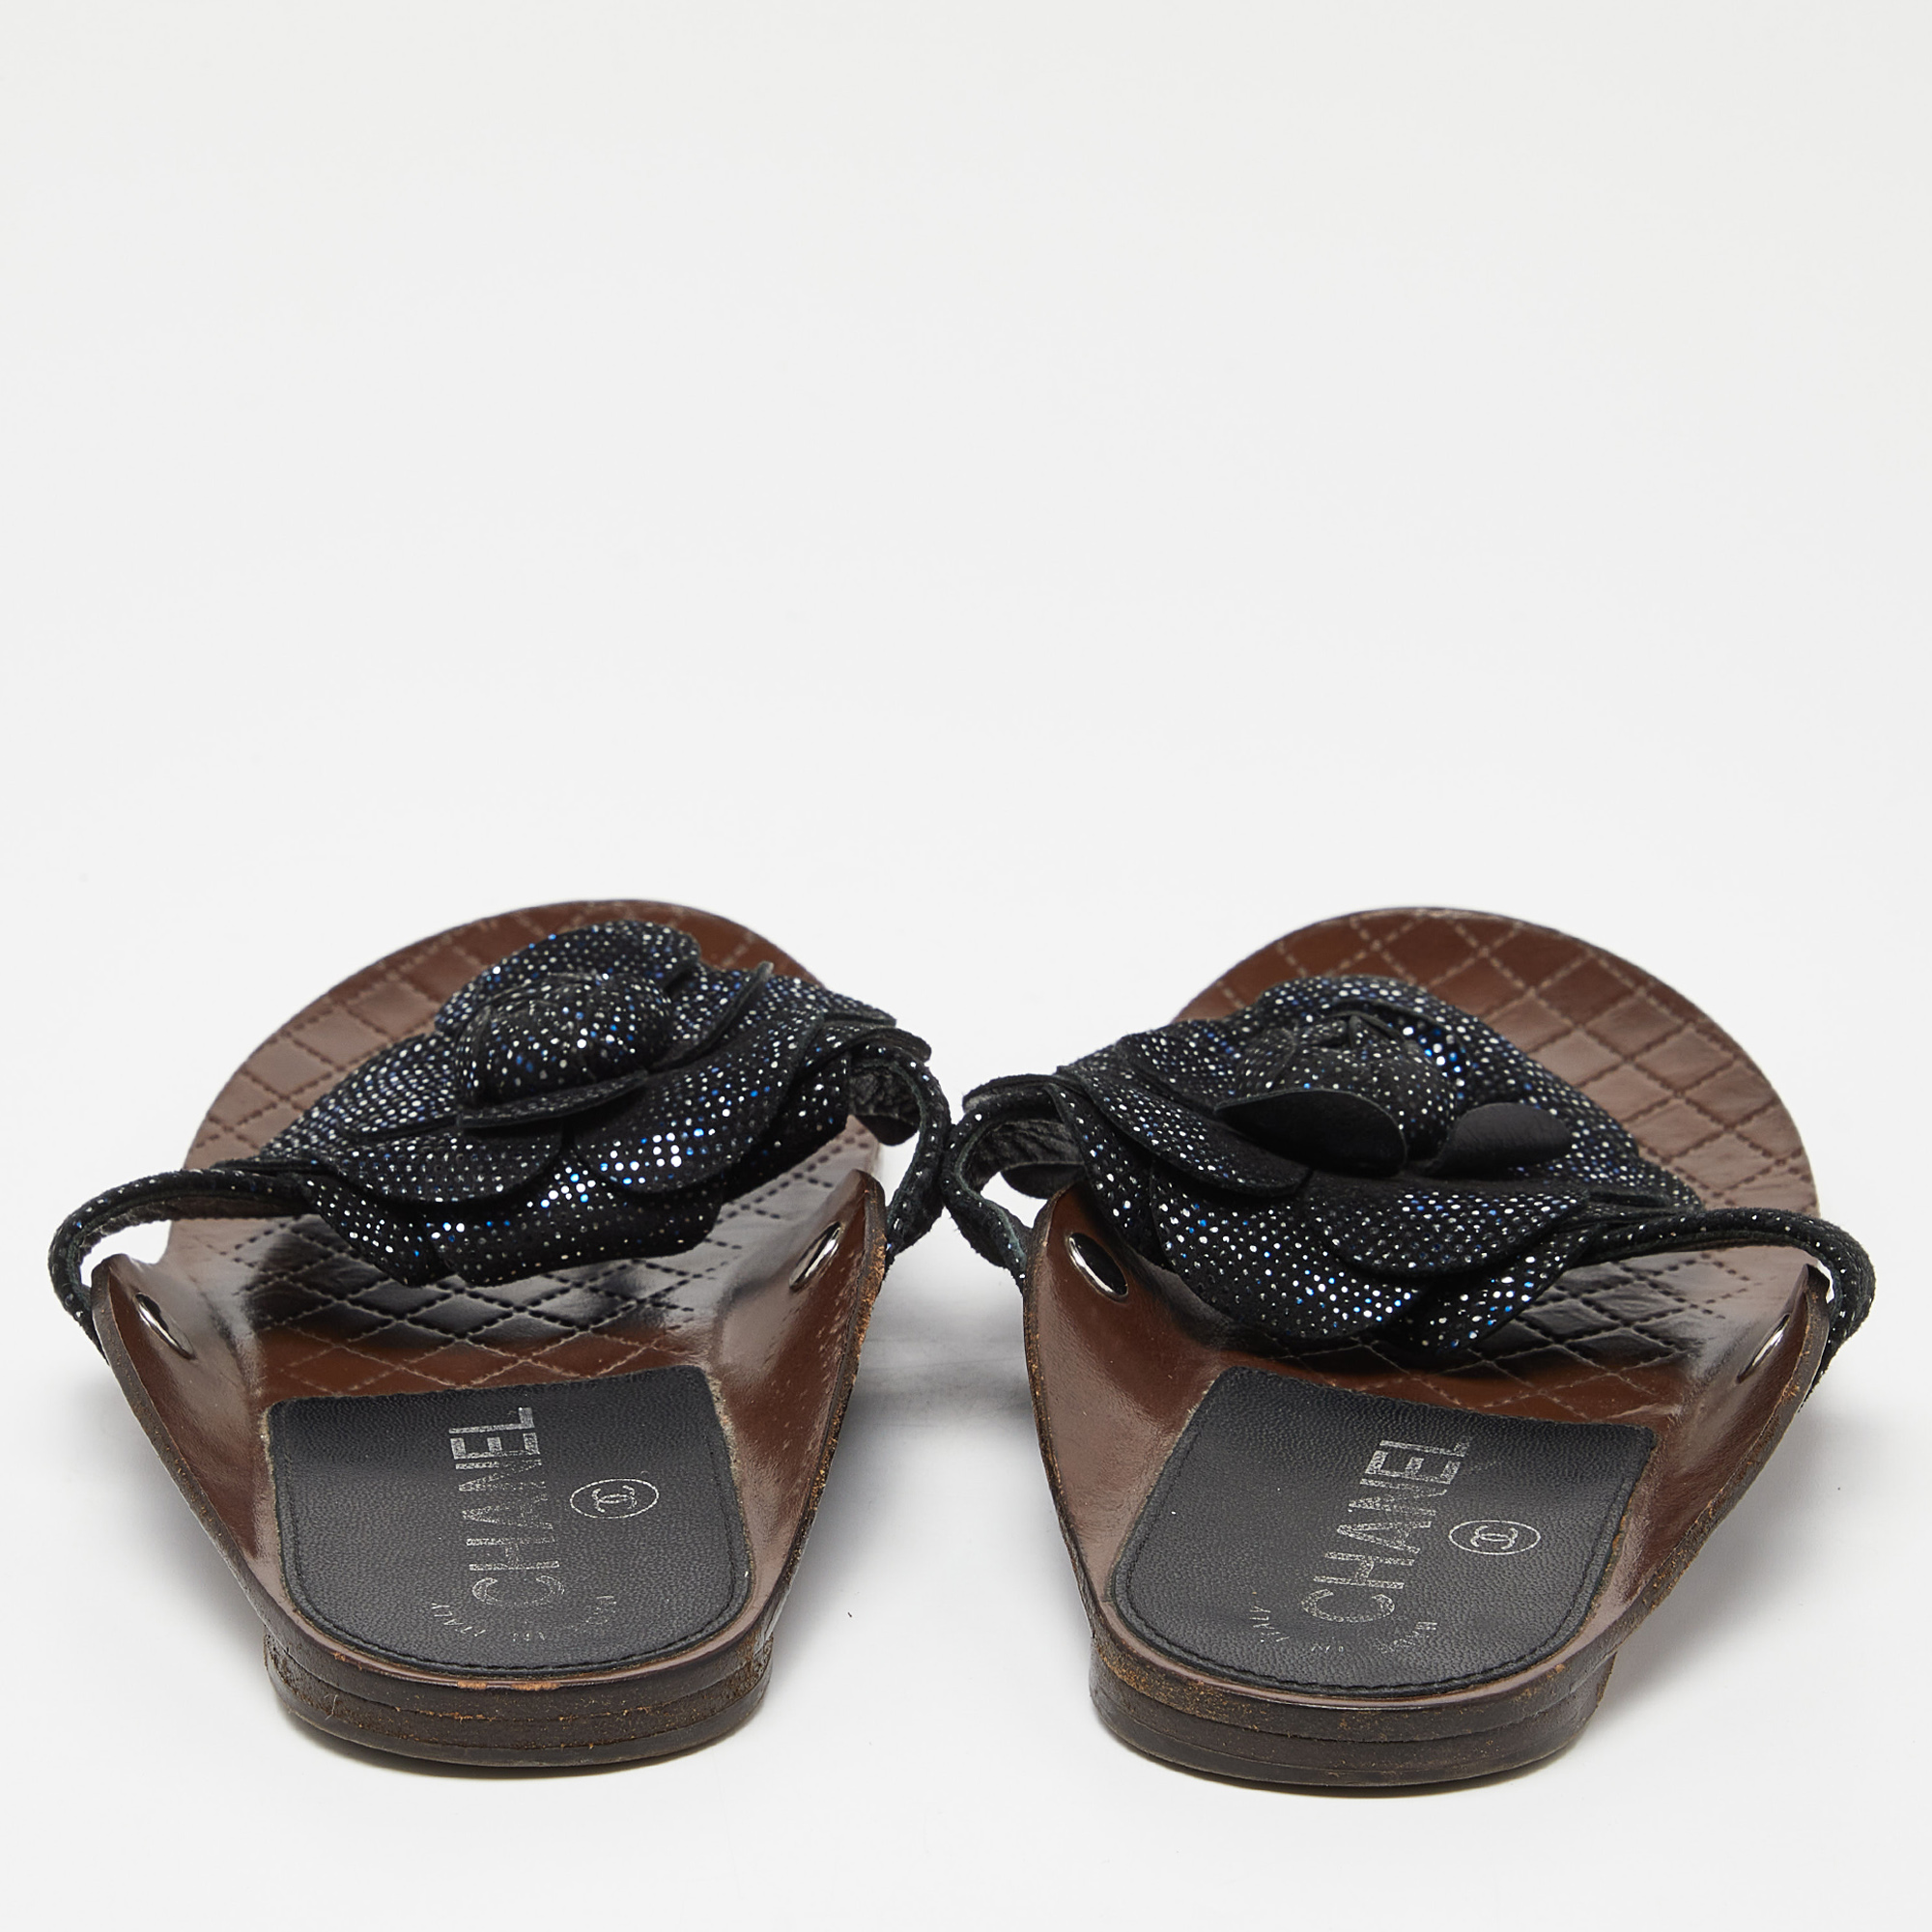 Chanel Black Metallic Suede Camellia Thong Sandals Size 35